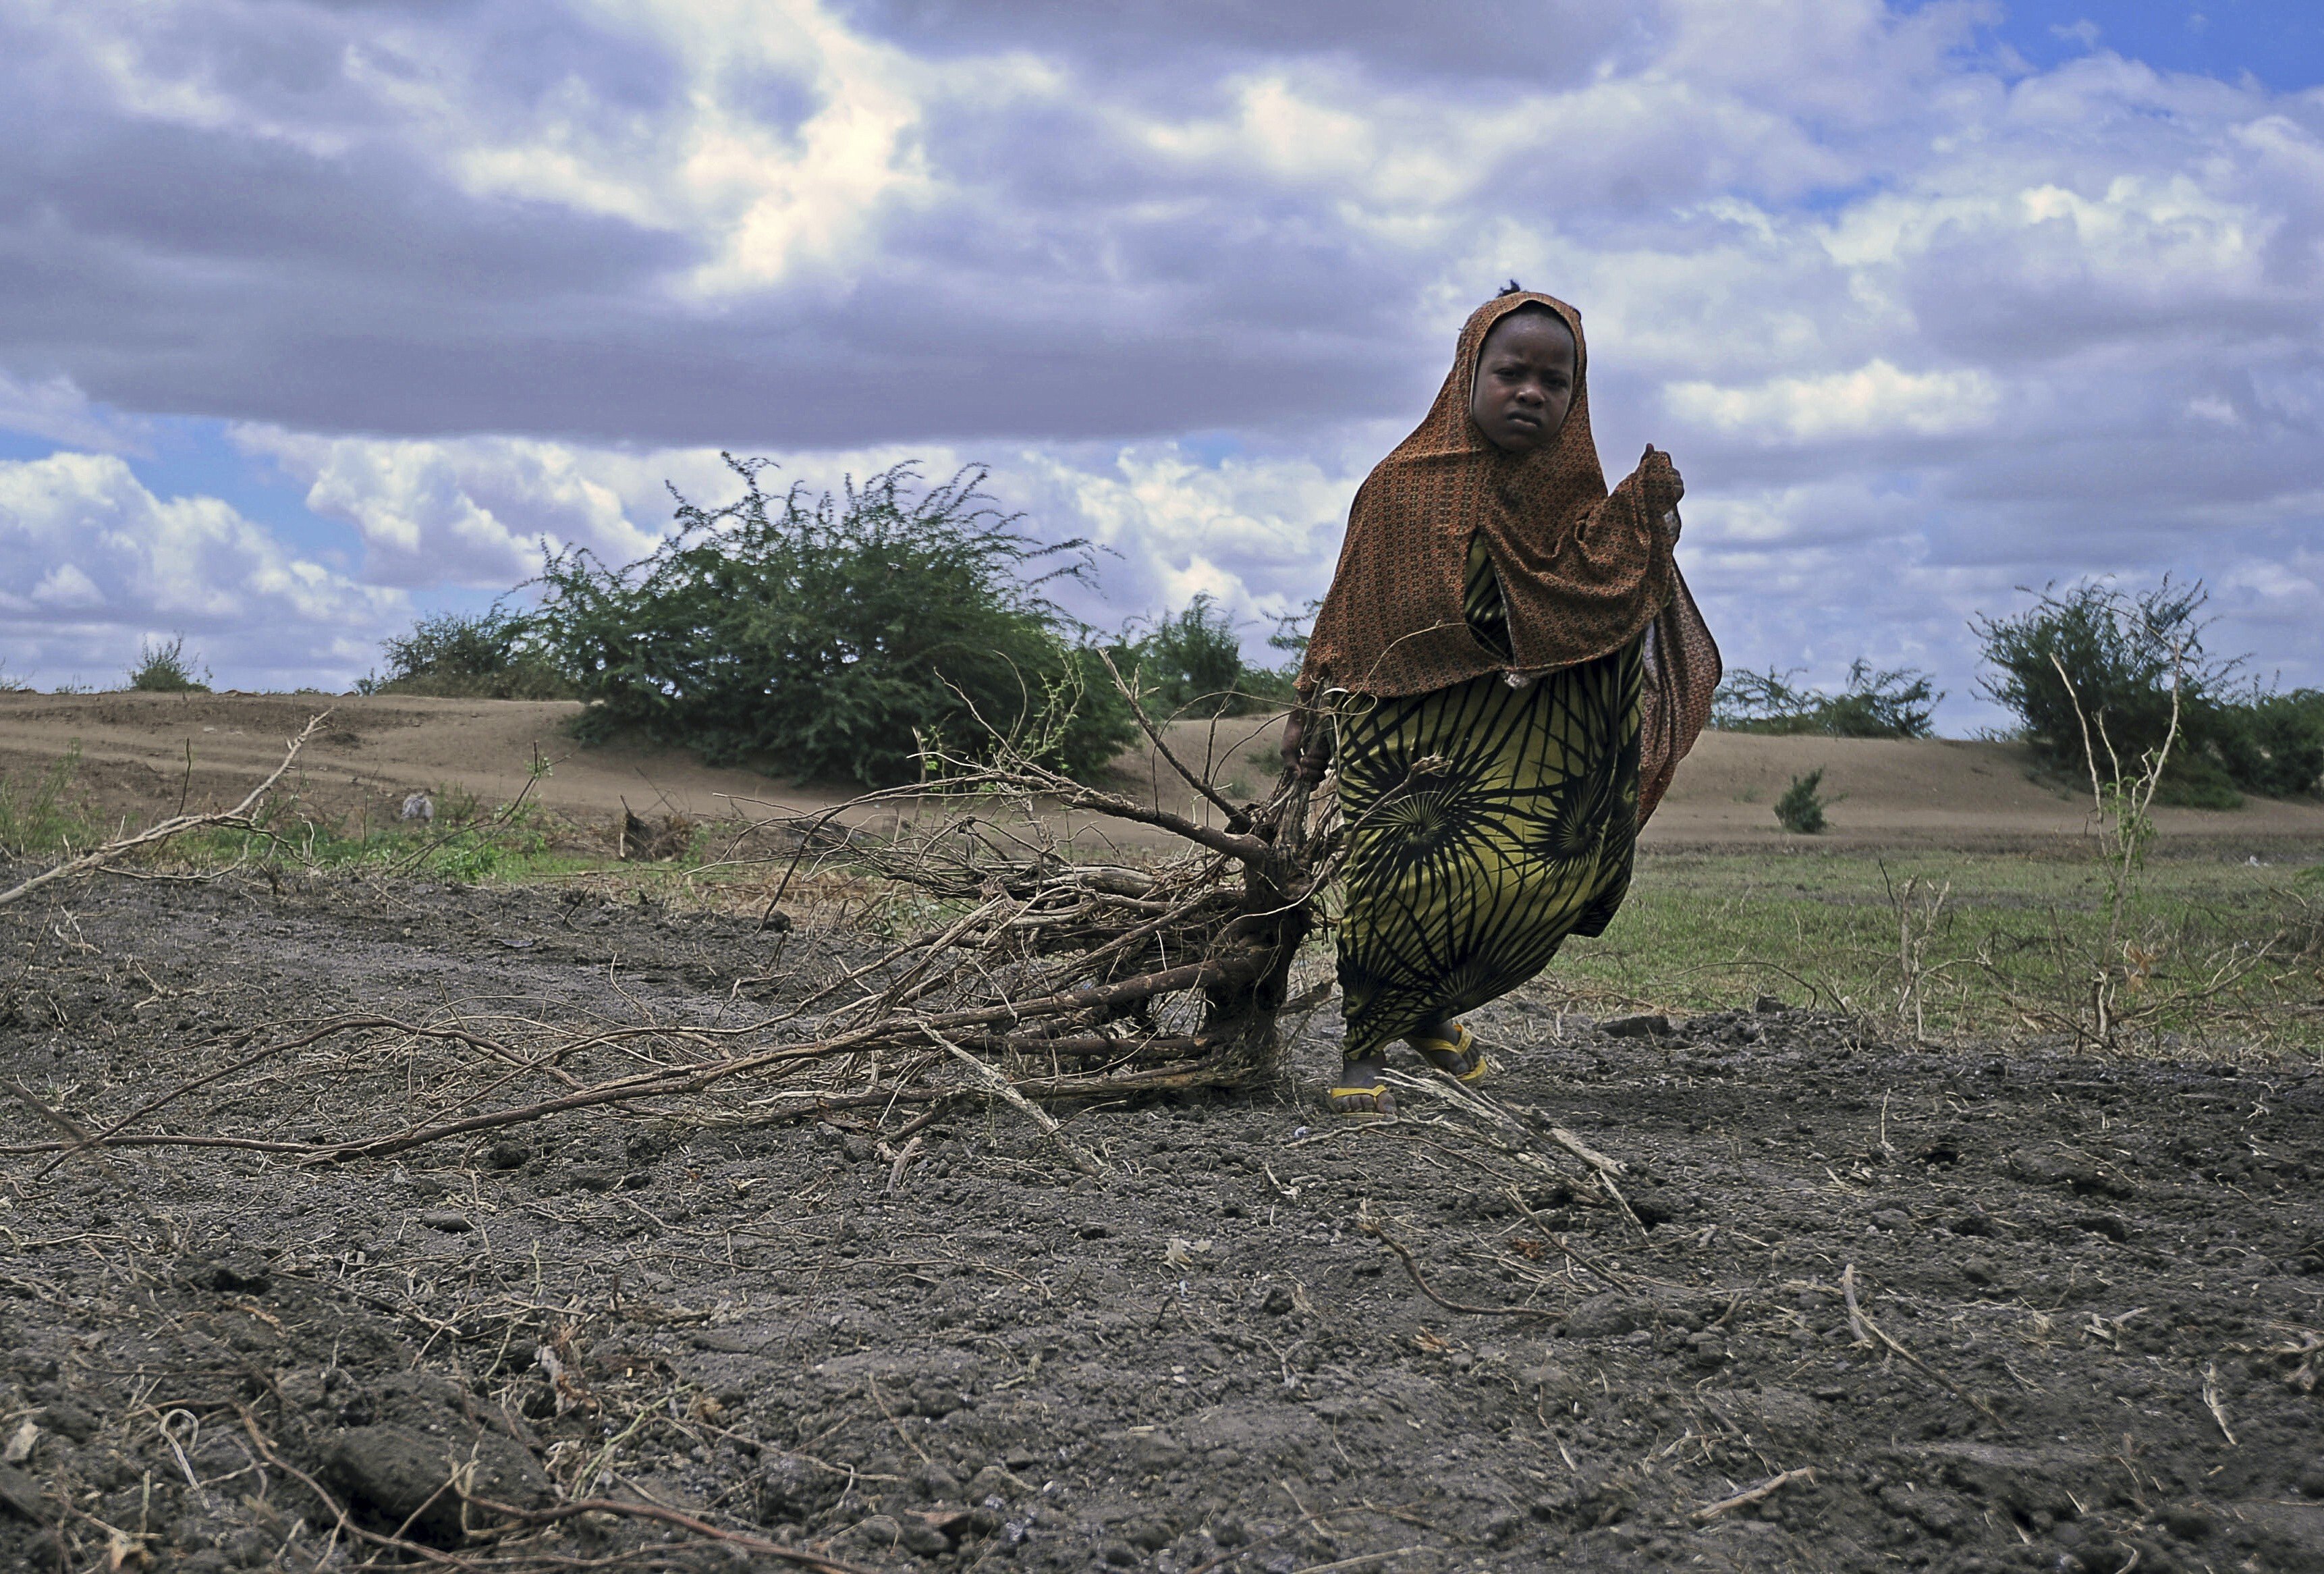 A Somali girl drags bundles of firewood for use as fuel for cooking near Jowhar town, north of the capital Mogadishu, in October, 2015. Clean tech can help reduce the drudgery that disproportionately burdens women, such as collecting water or fuel. Photo: AFP